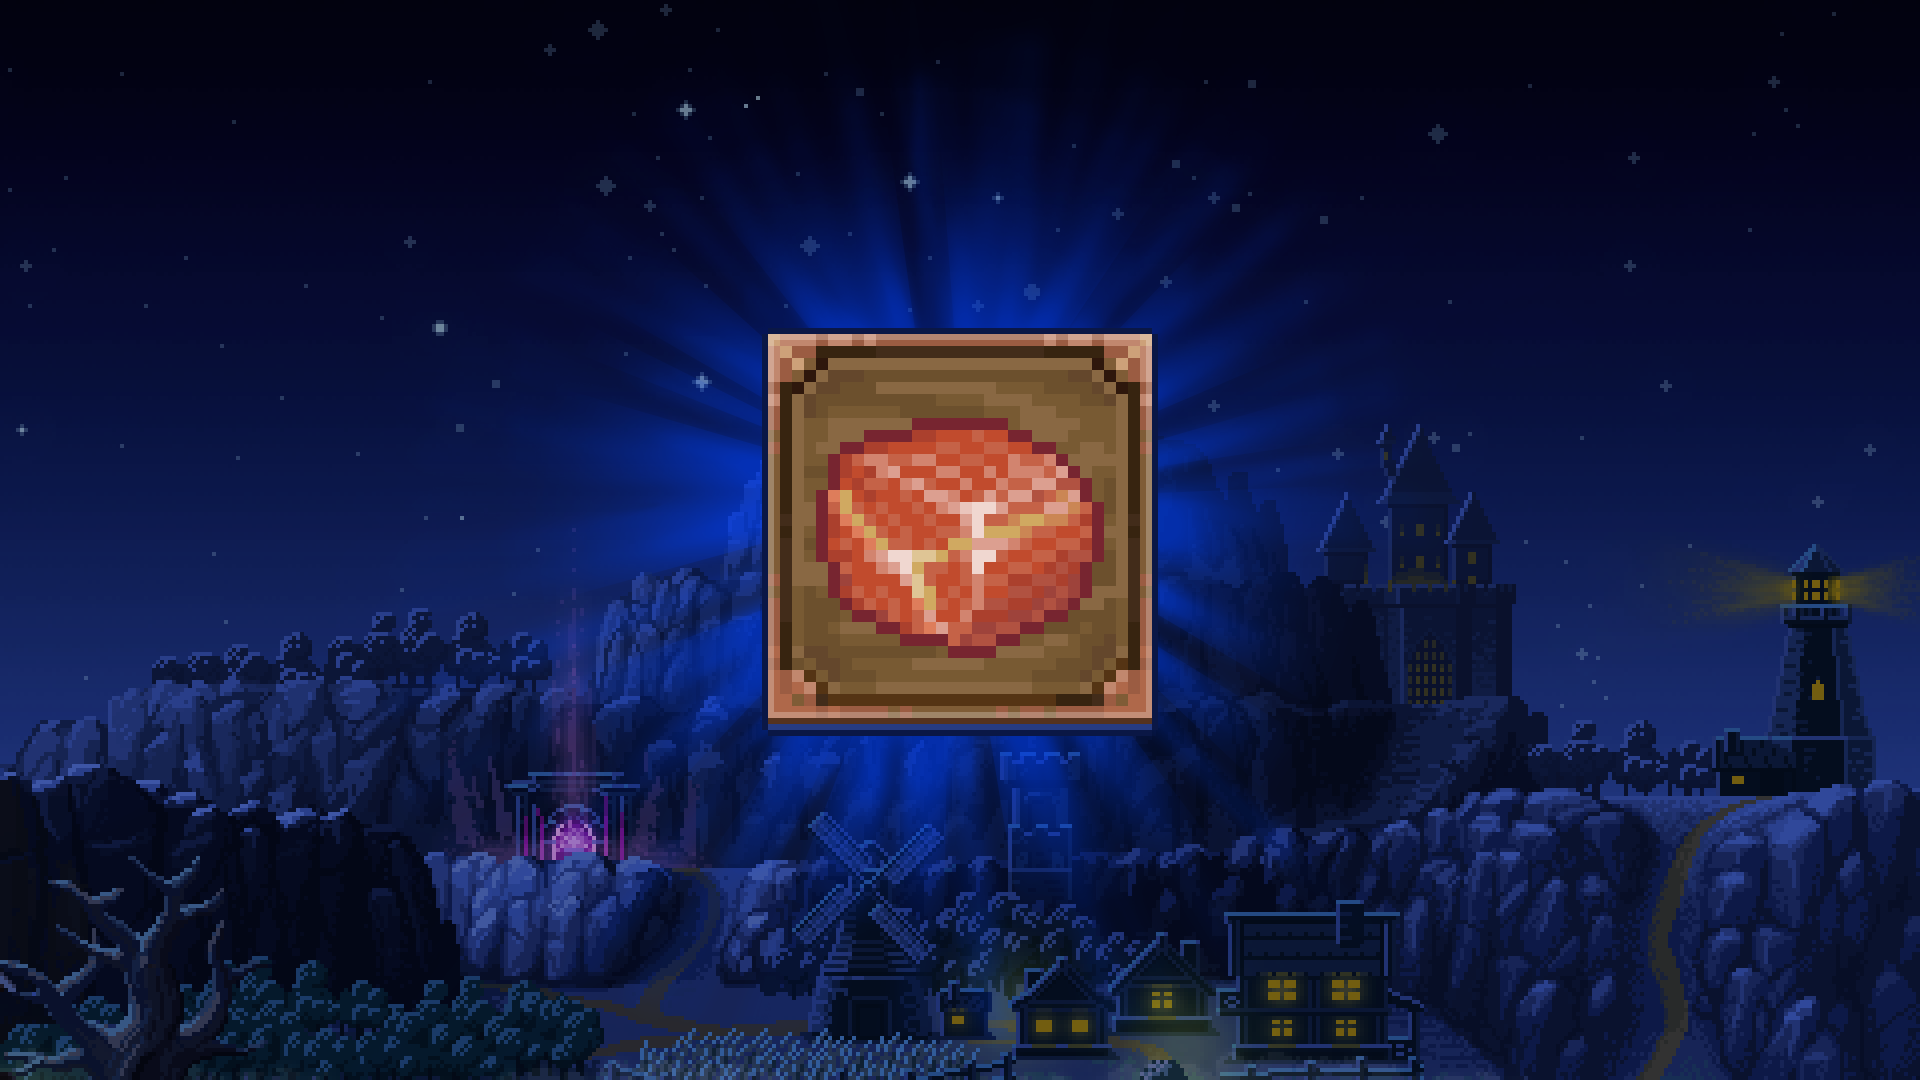 Icon for First slice